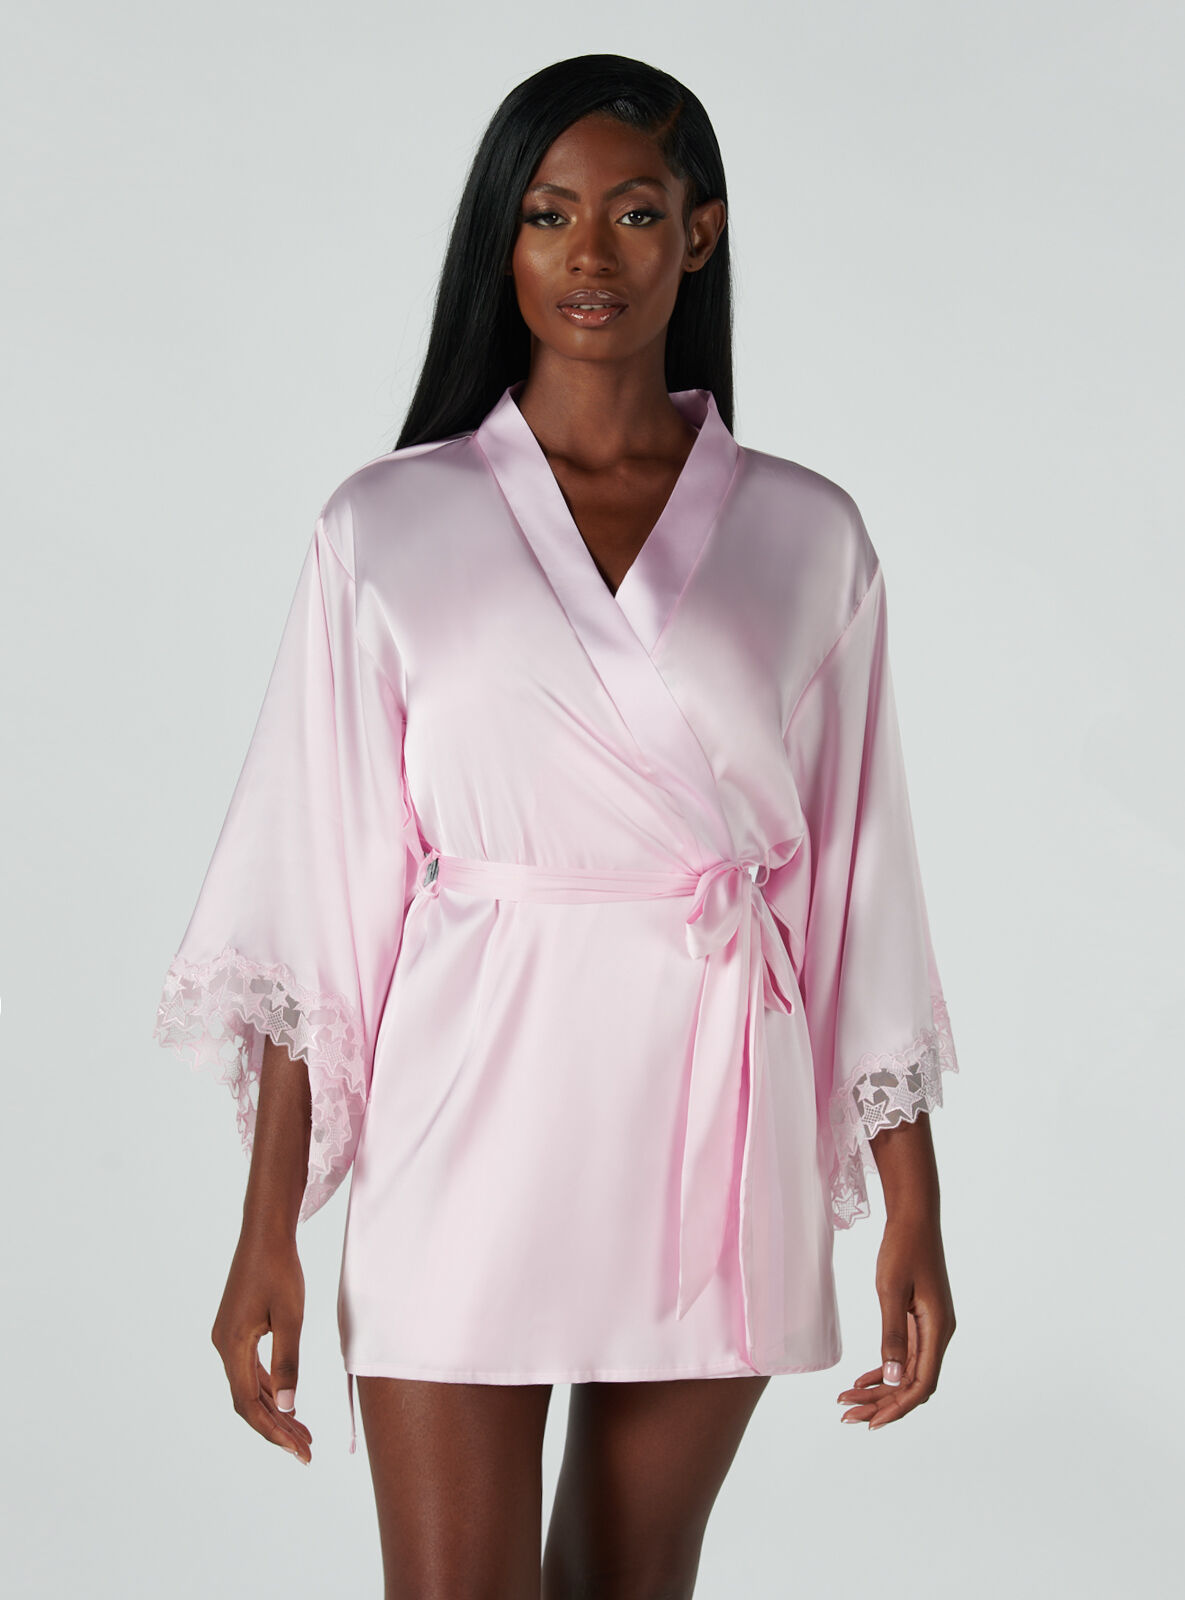 Satin Kimono 3/4 Sleeve Plain Nightwear Short Dressing Gown with Lace Aibrou Womens Robe 